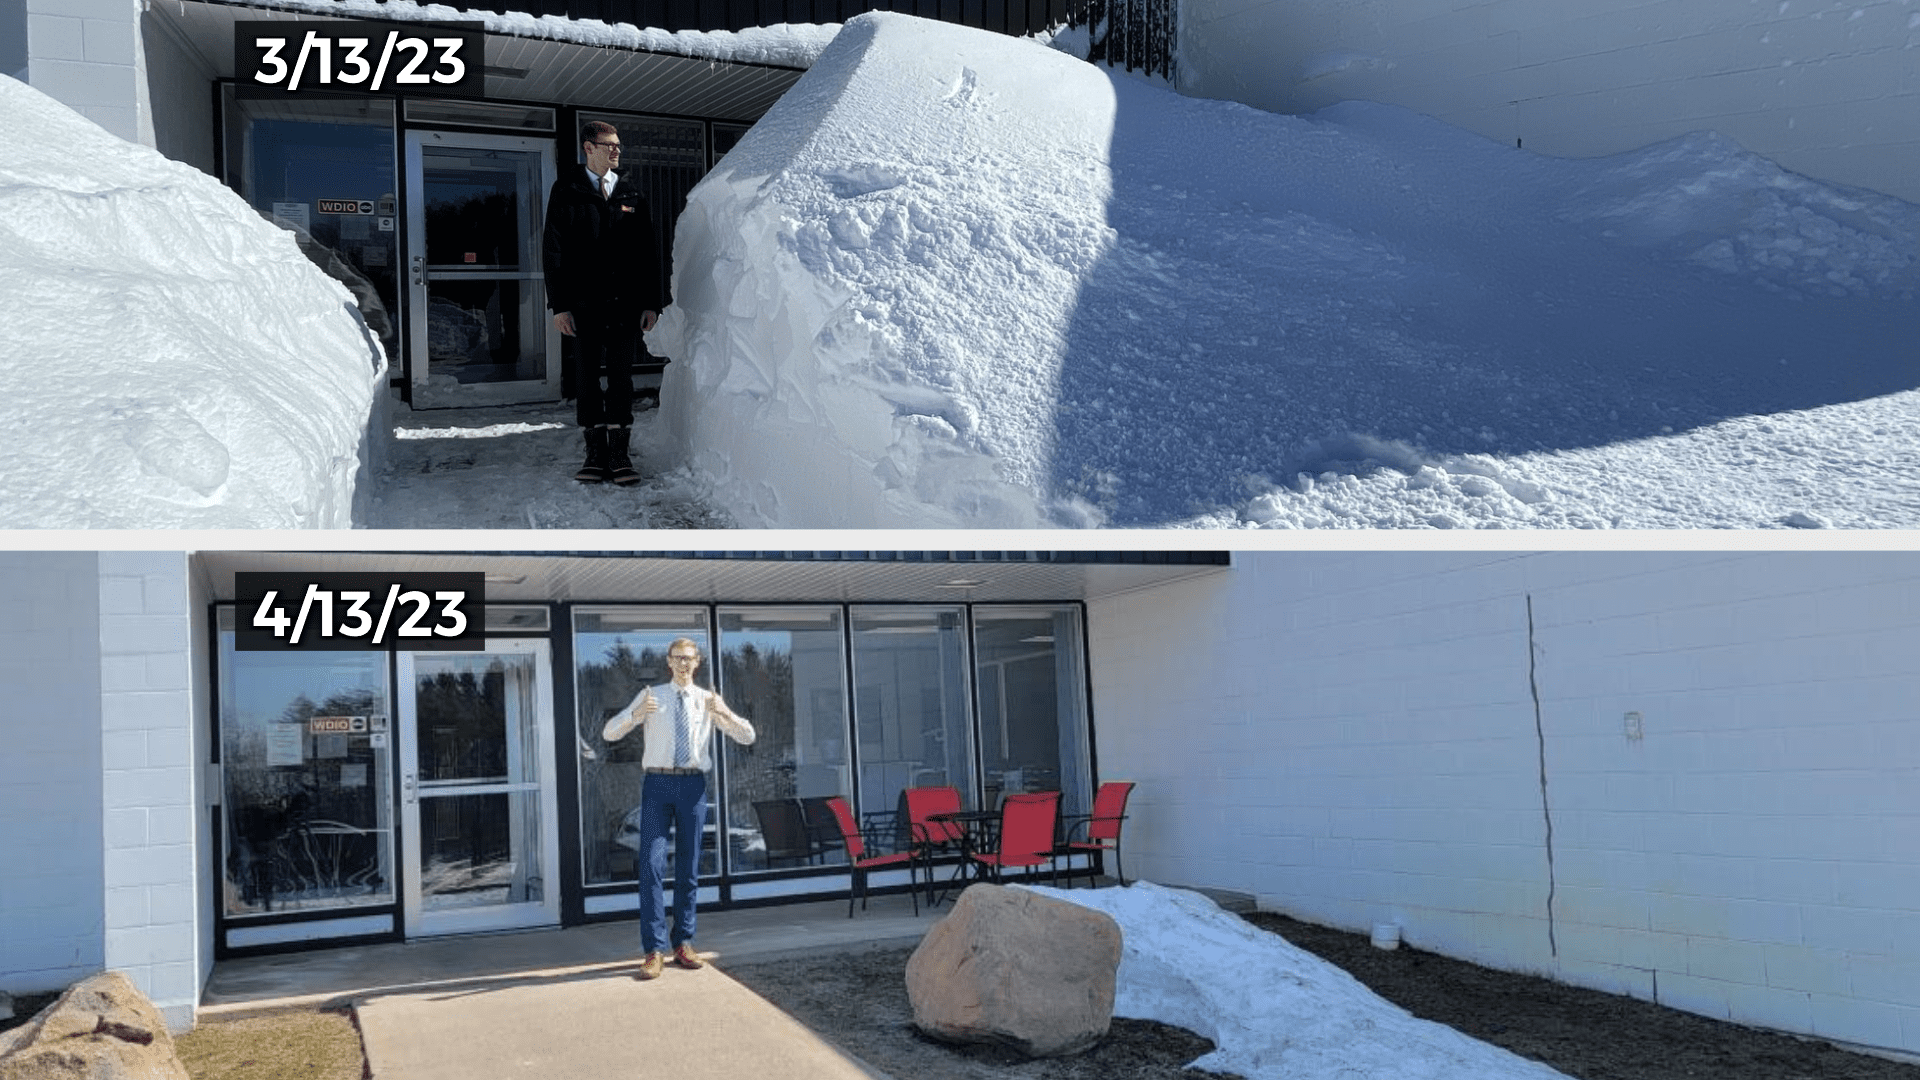 Image of large amounts of snow on March 13 compared to an image with very little snow on April 13